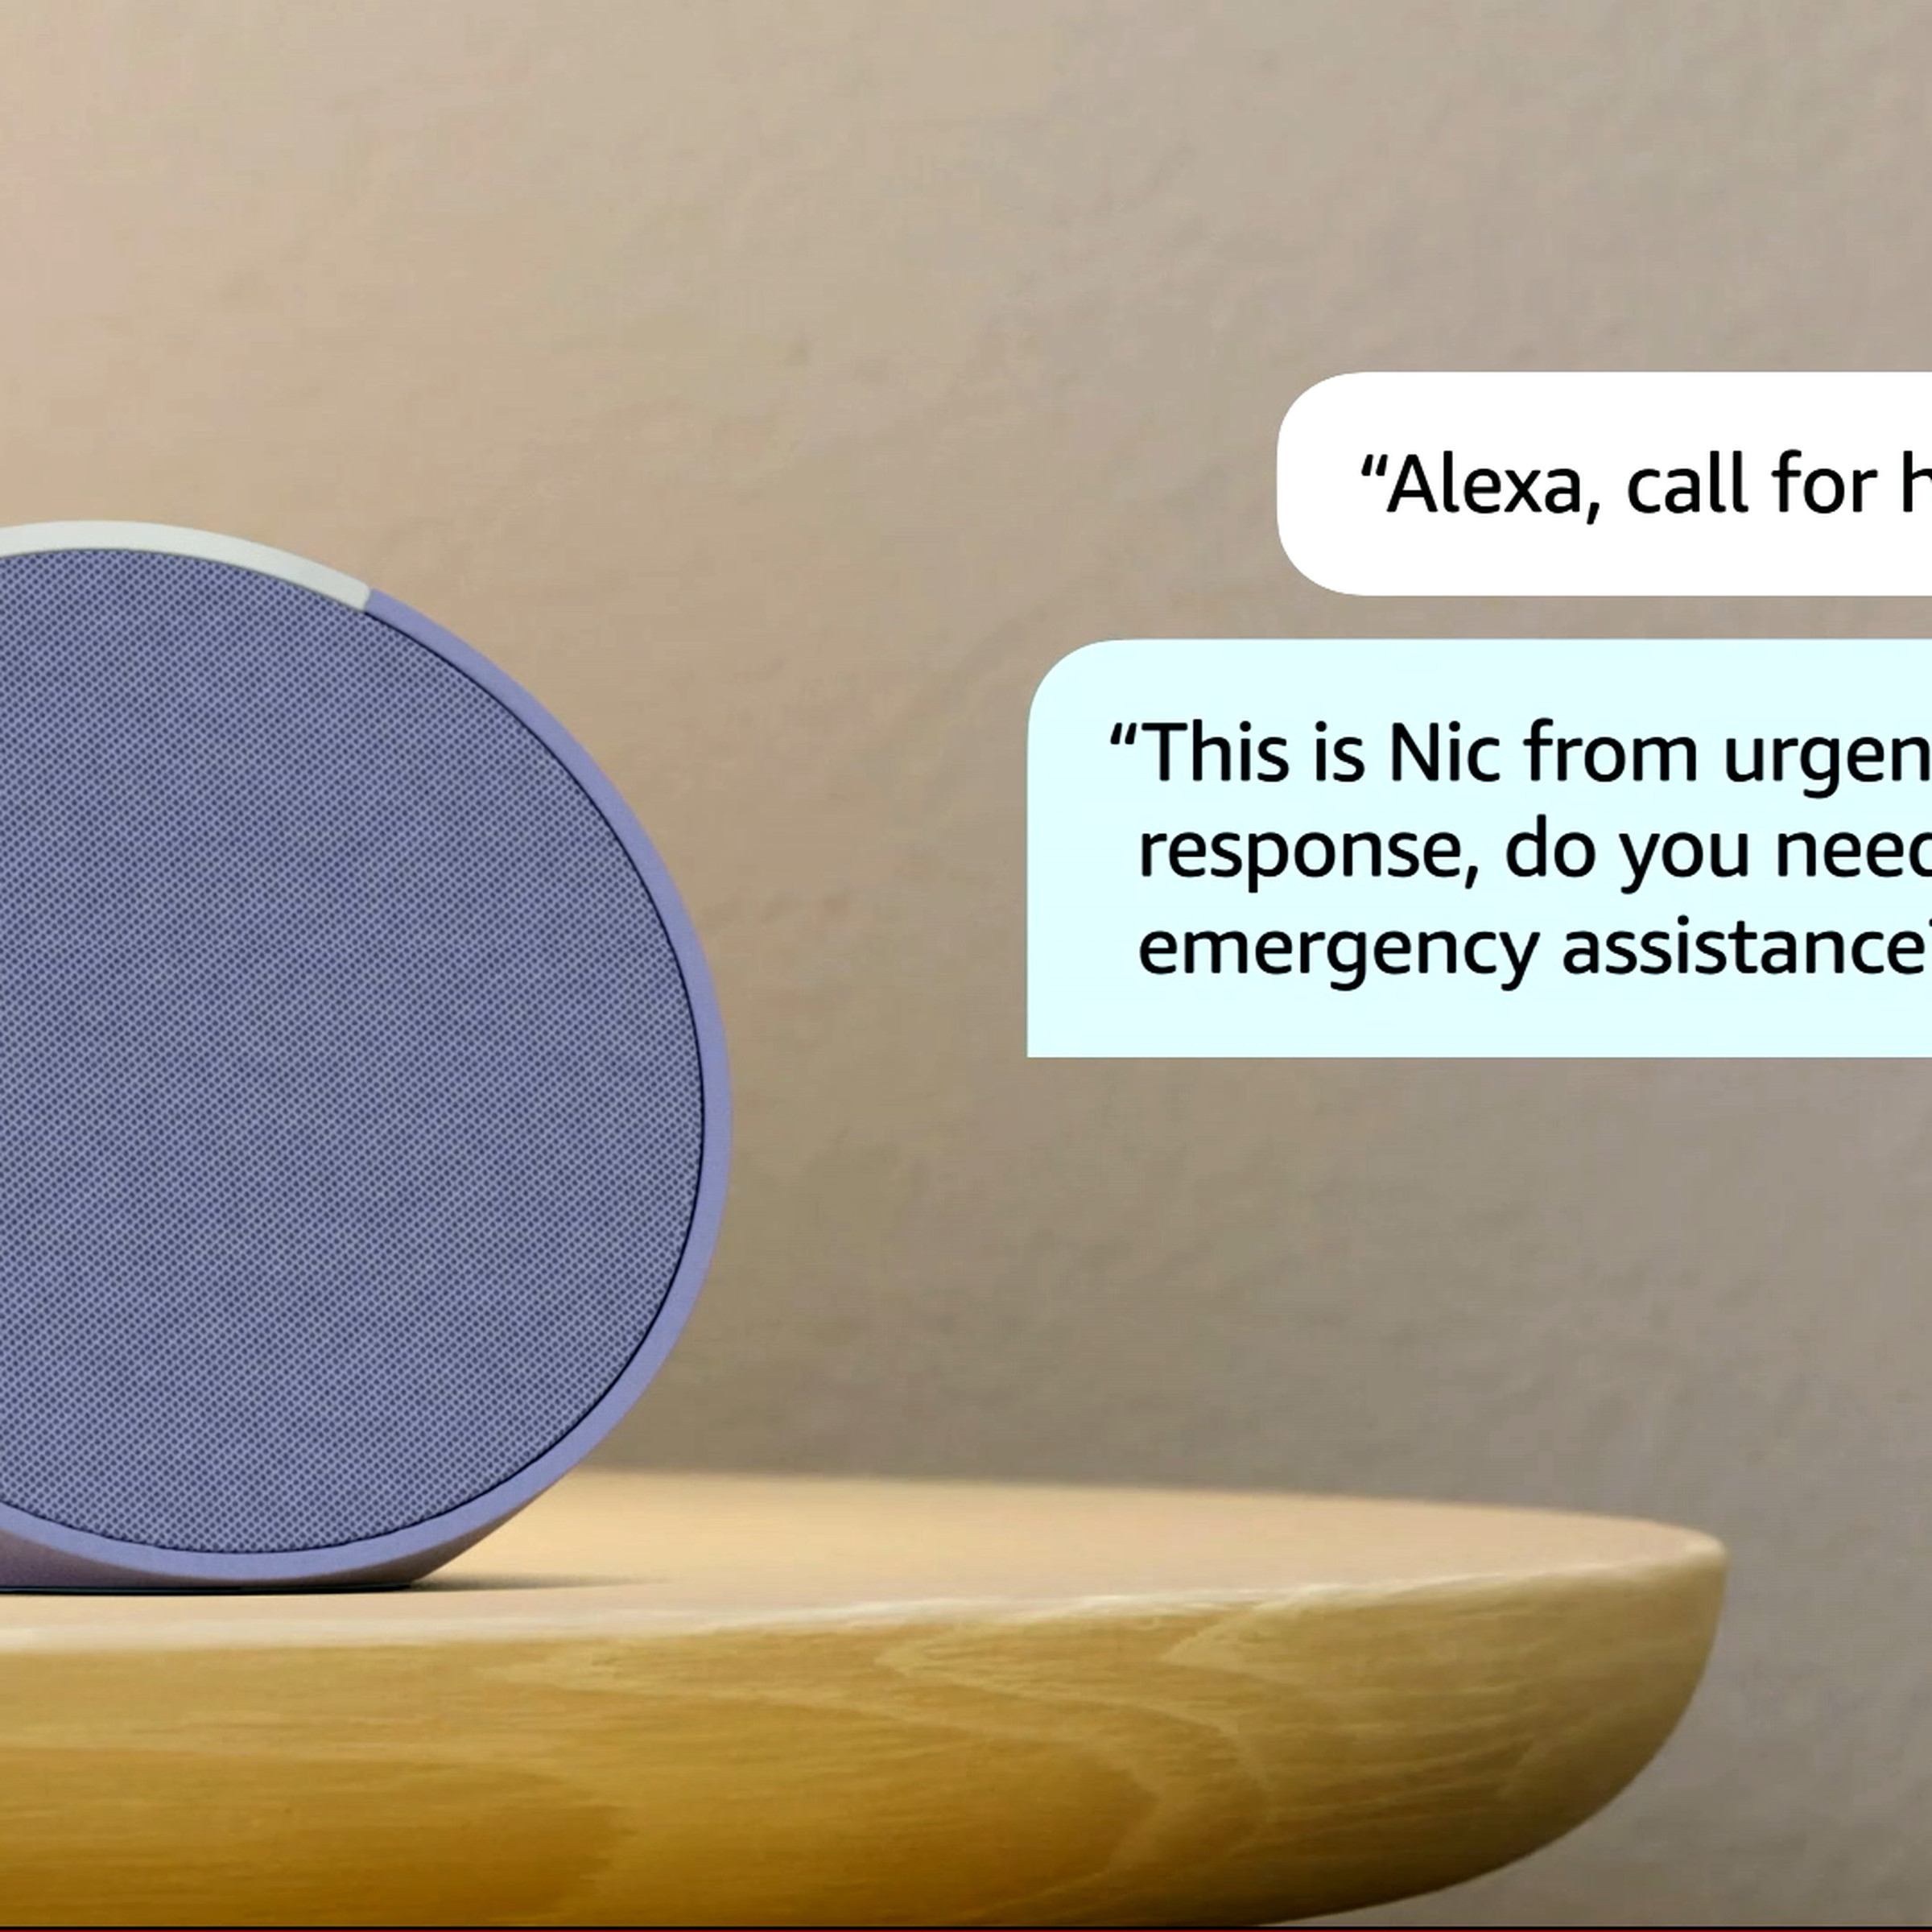 An image highlighting Amazon’s Alexa Emergency Assist feature